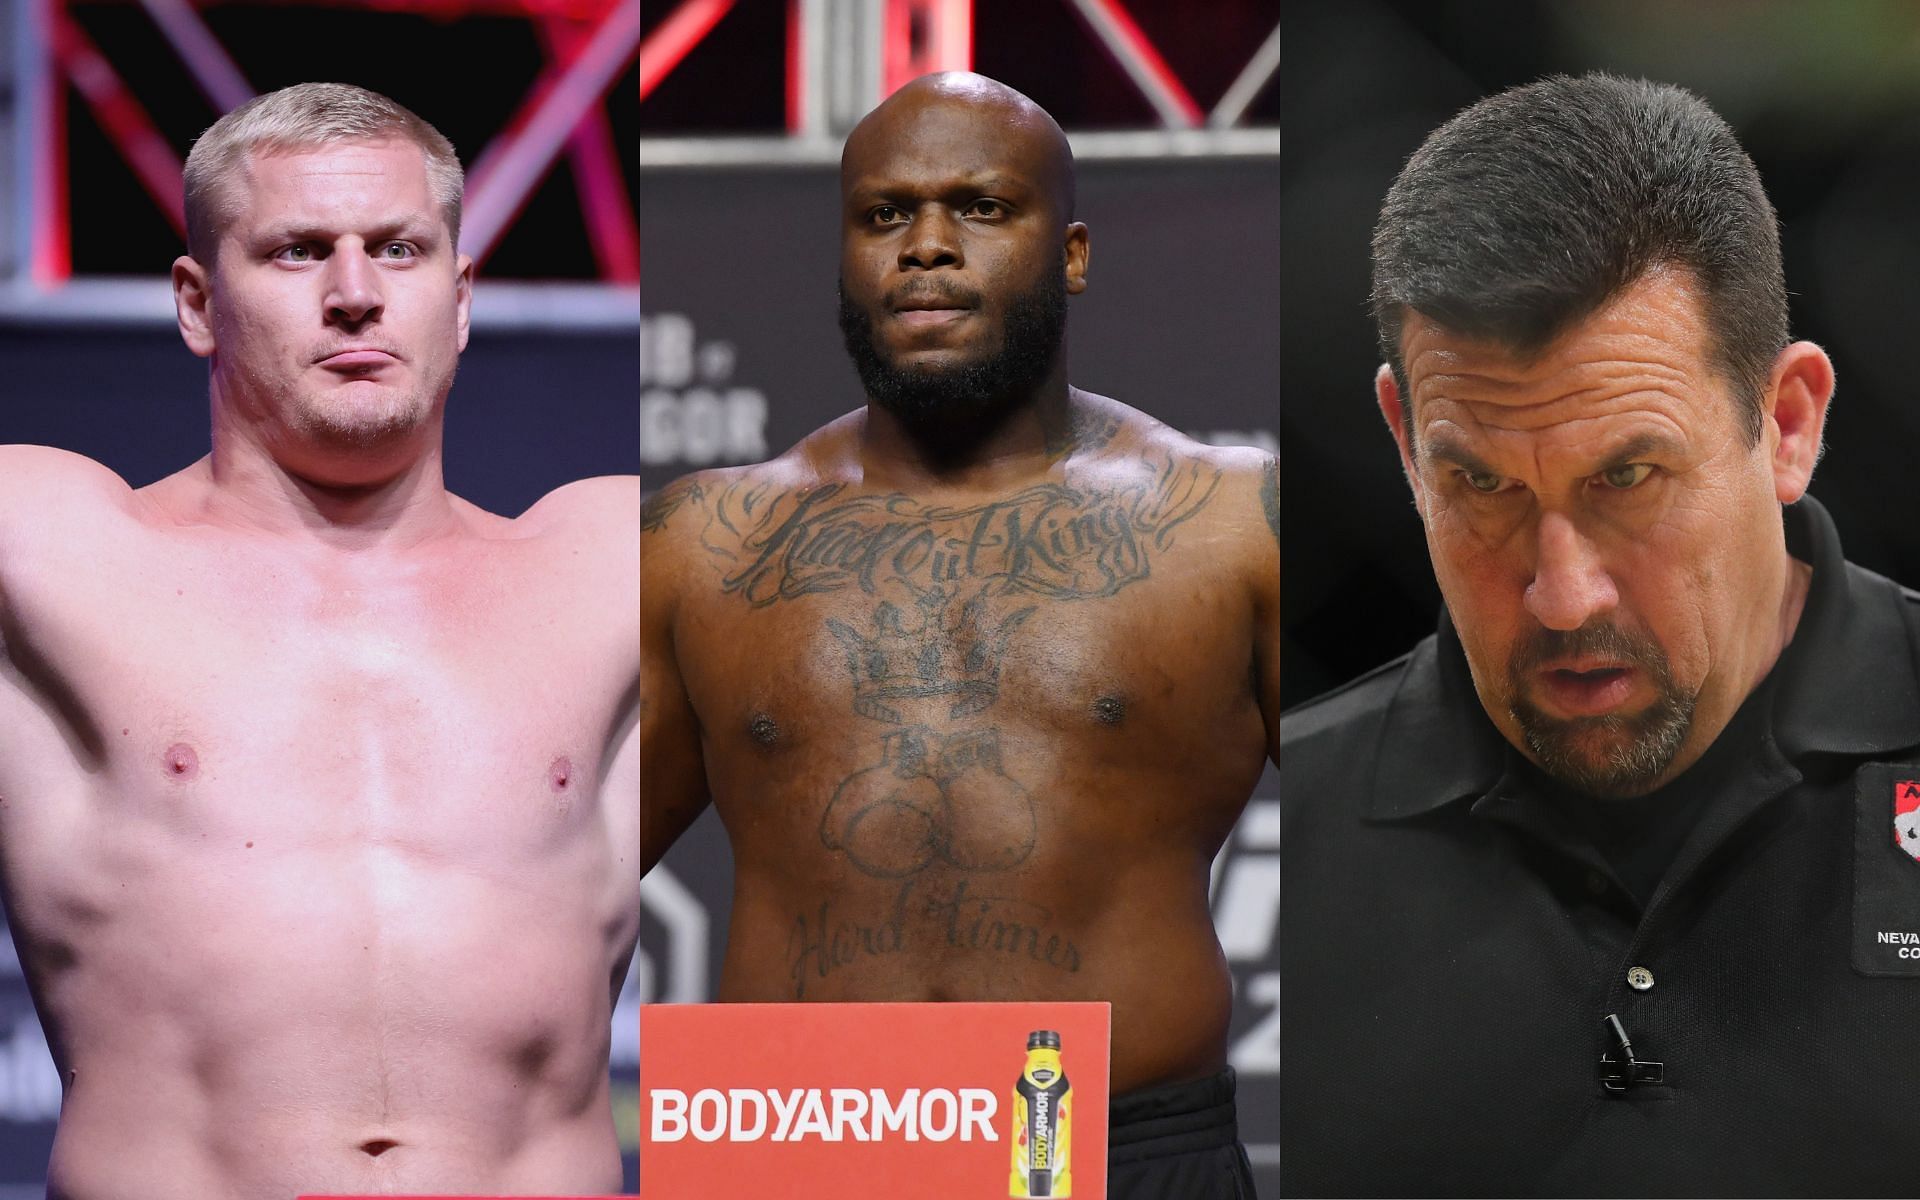 From left to right: Sergei Pavlovic, Derrick Lewis, and John McCarthy